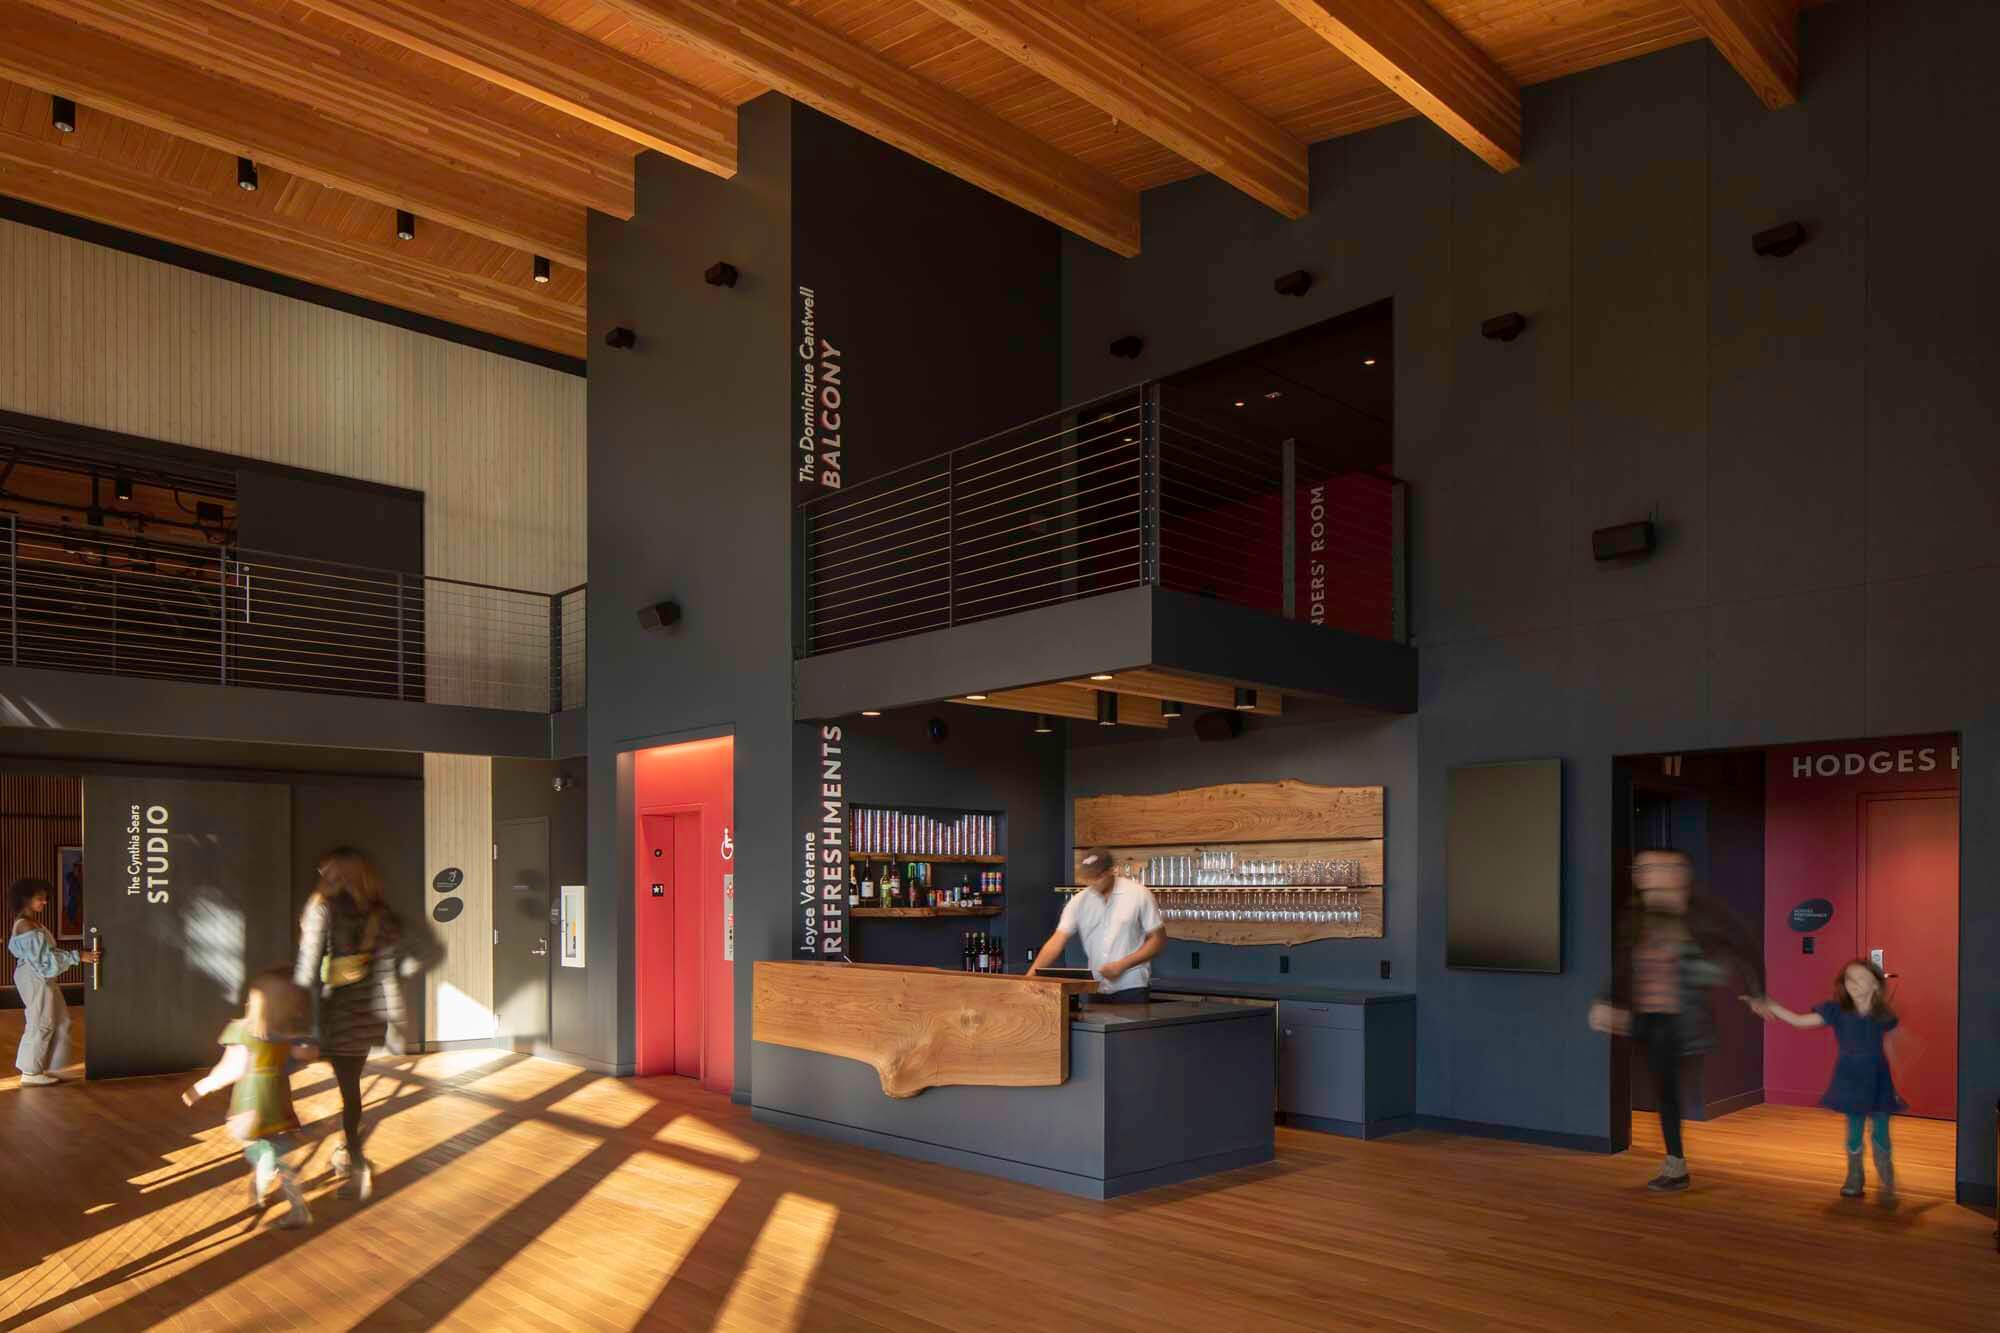 Lobby with a wooden roof and a black wall. A steel balcony and a bar area.